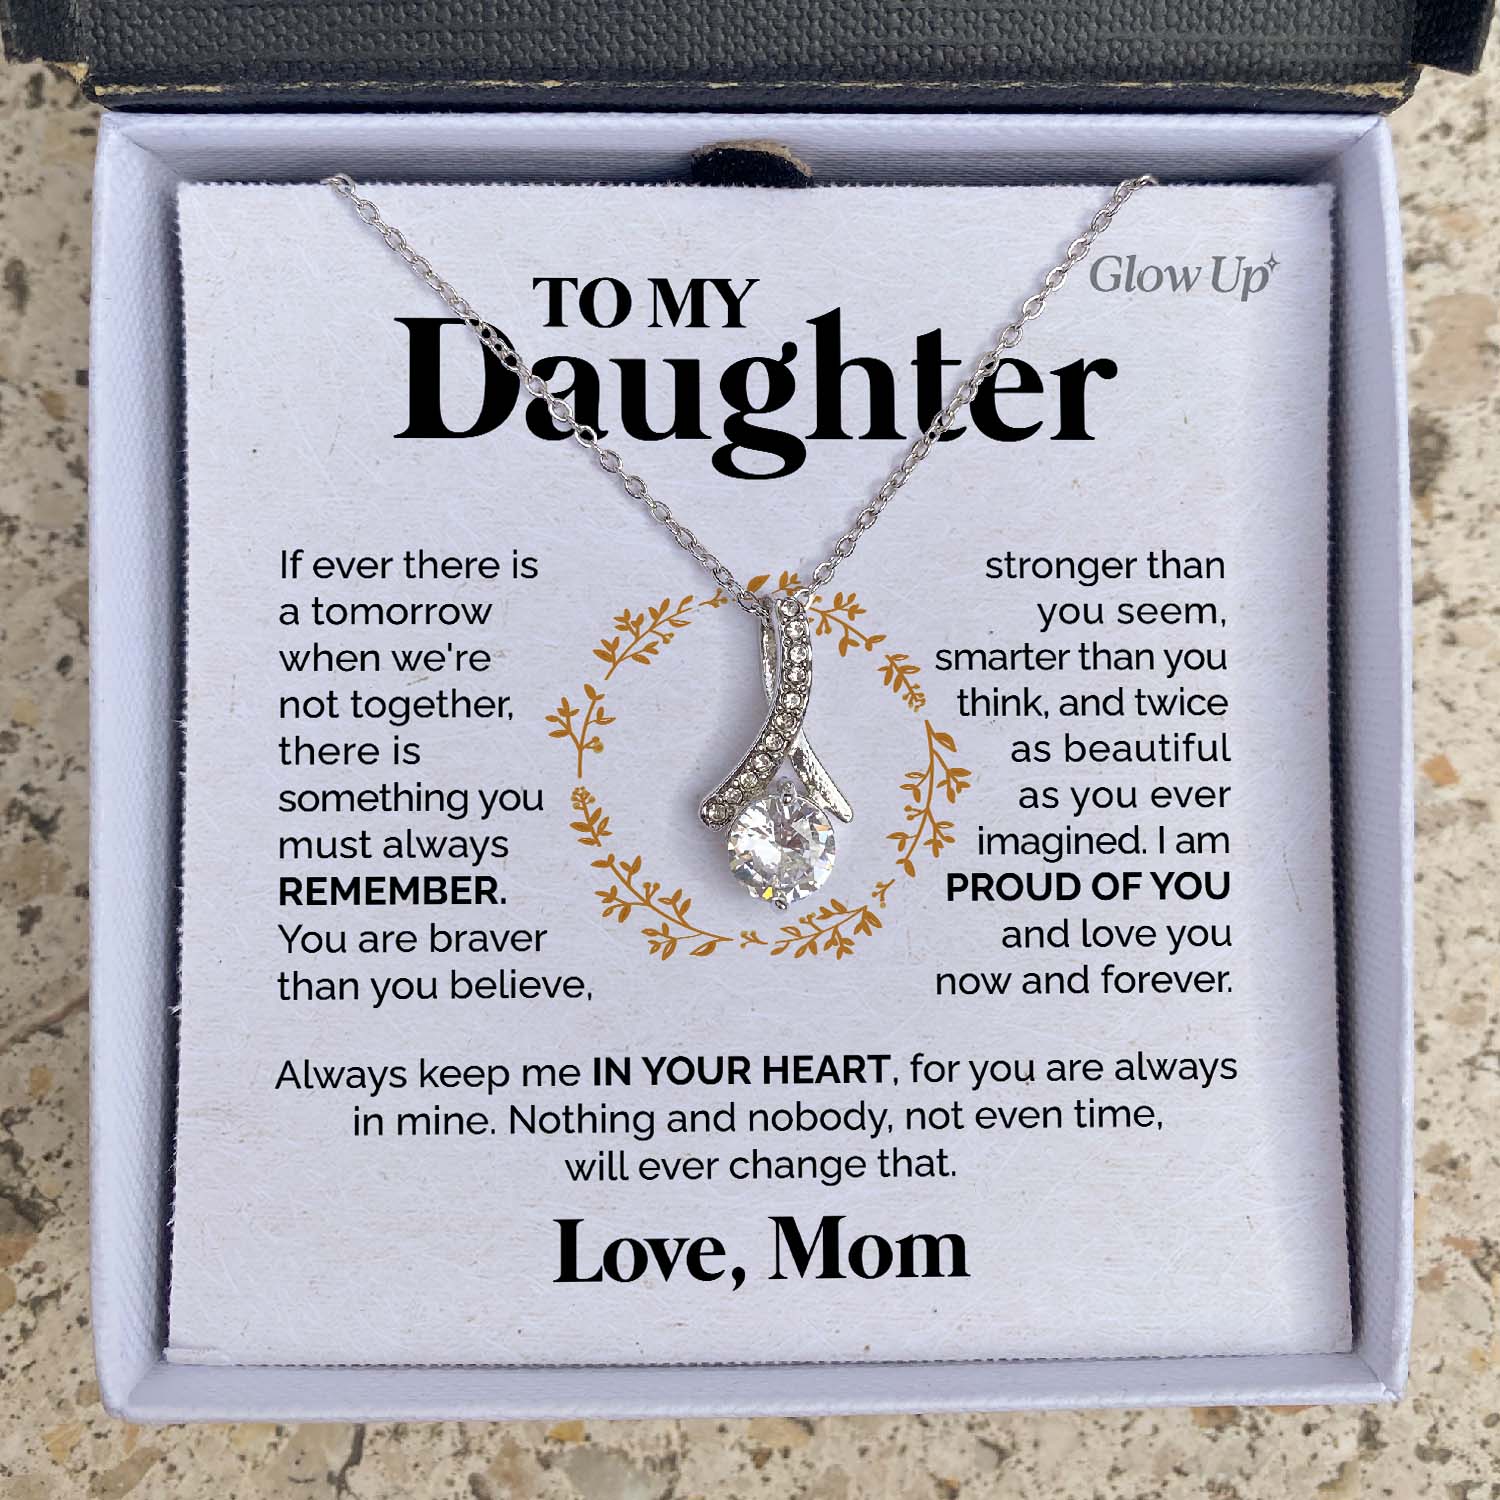 ShineOn Fulfillment Jewelry 14K White Gold Finish / Two-Toned Box To my Daughter - I am proud of you - Ribbon Necklace